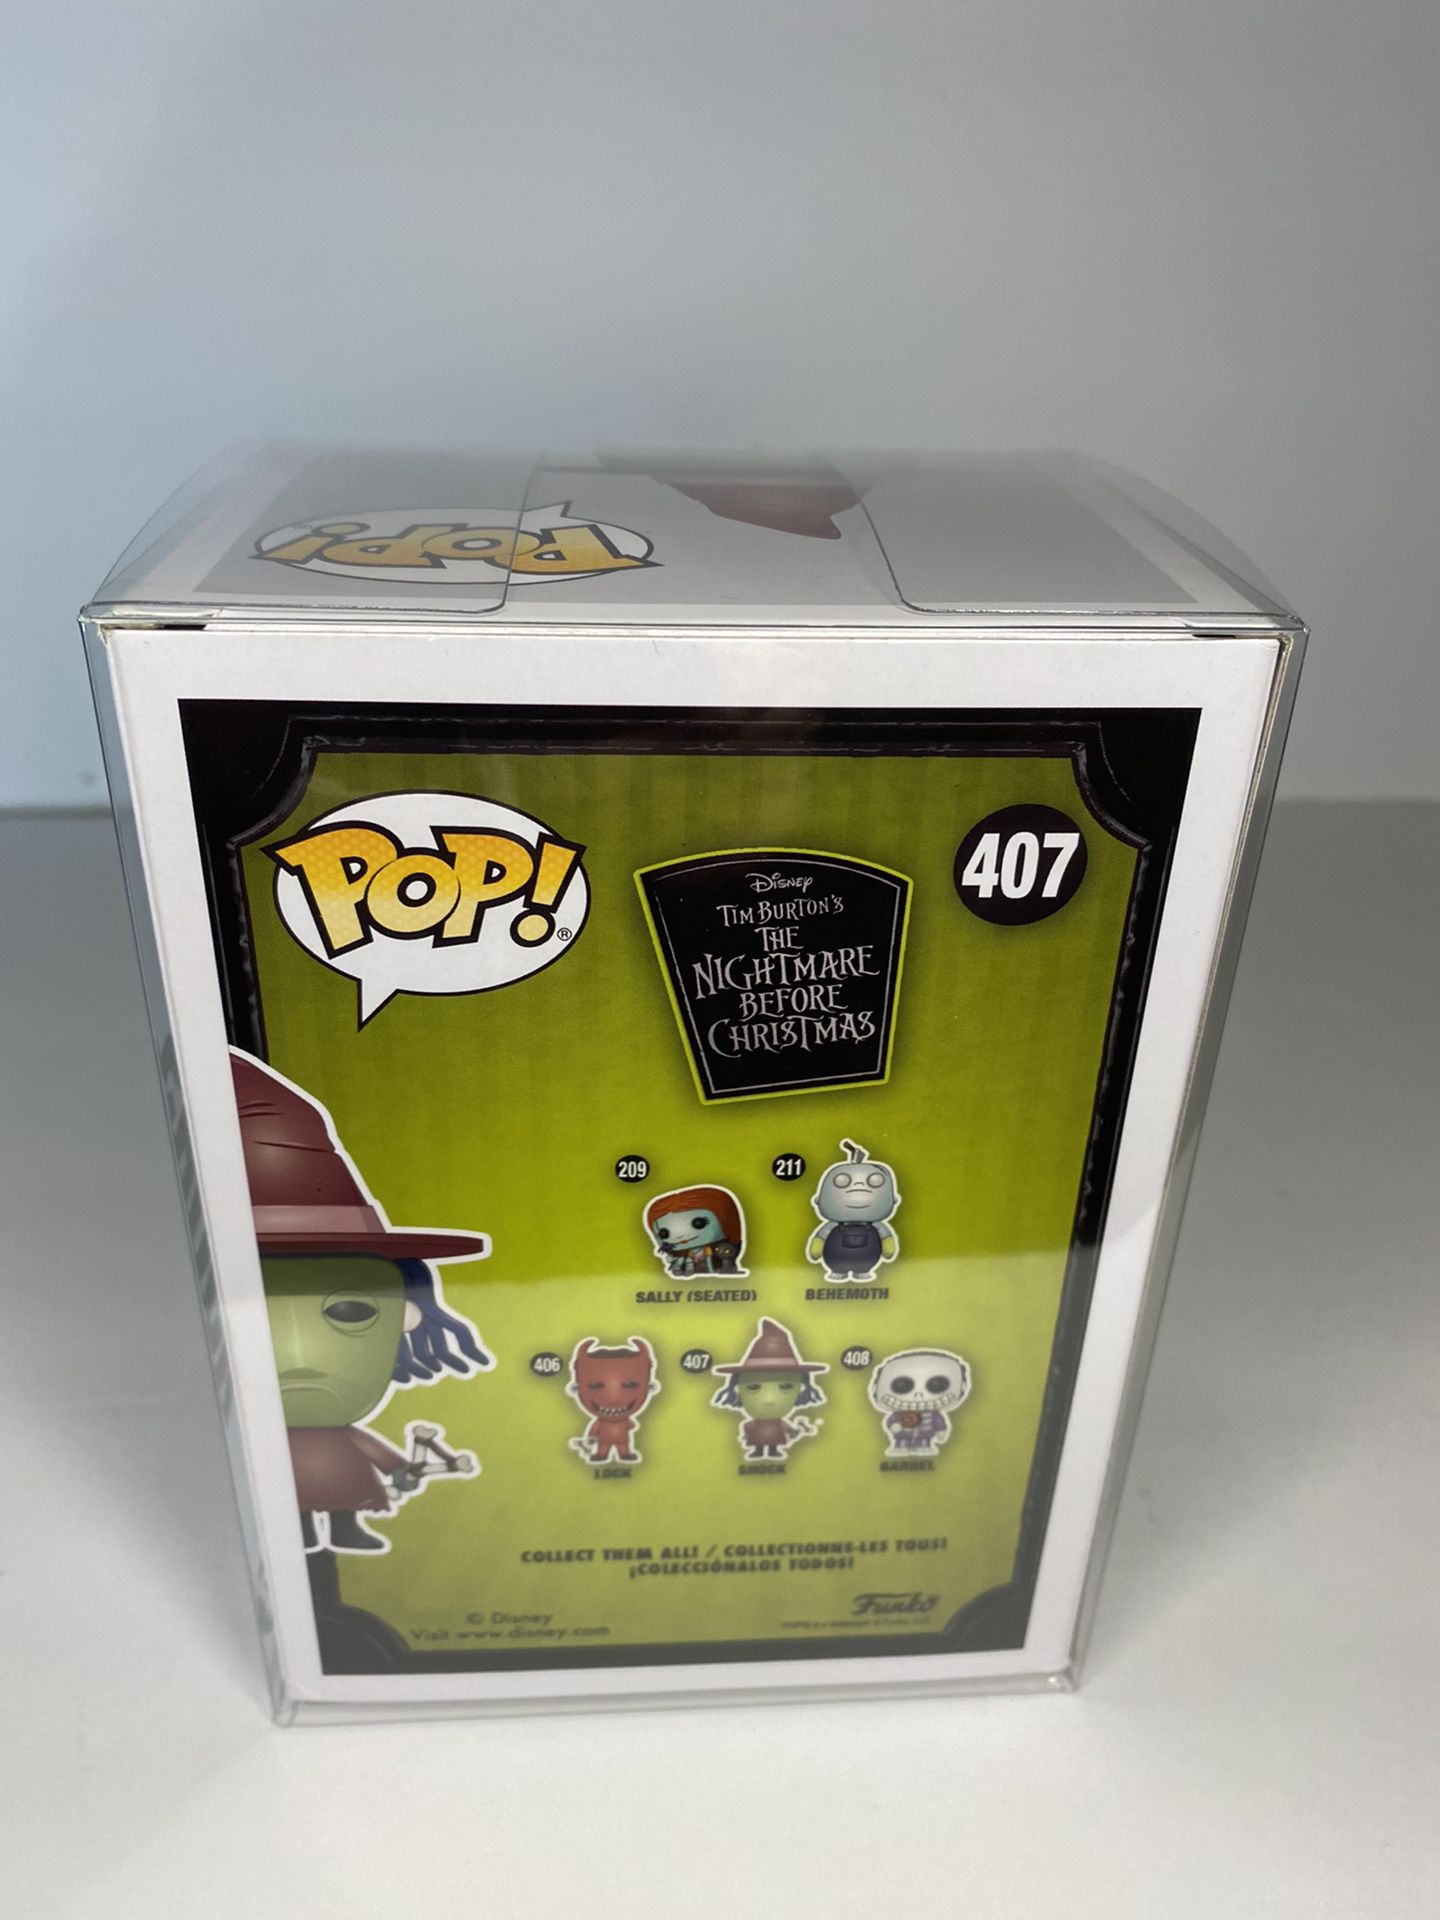 Shock From Disney’s Nightmare Before Christmas Funko POP In Protector Case 